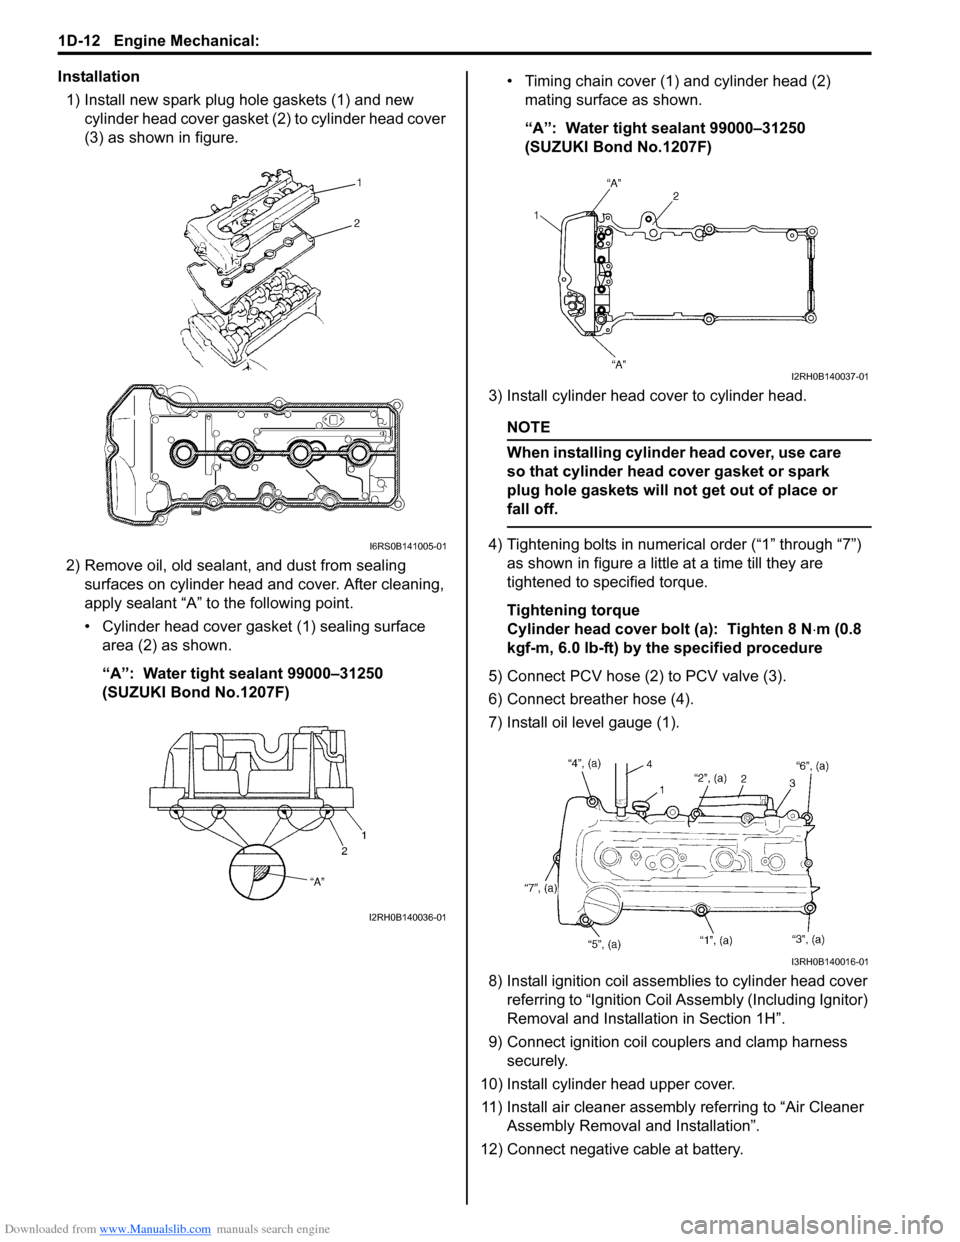 SUZUKI SX4 2006 1.G Service Service Manual Downloaded from www.Manualslib.com manuals search engine 1D-12 Engine Mechanical: 
Installation
1) Install new spark plug hole gaskets (1) and new 
cylinder head cover gasket (2) to cylinder head cove